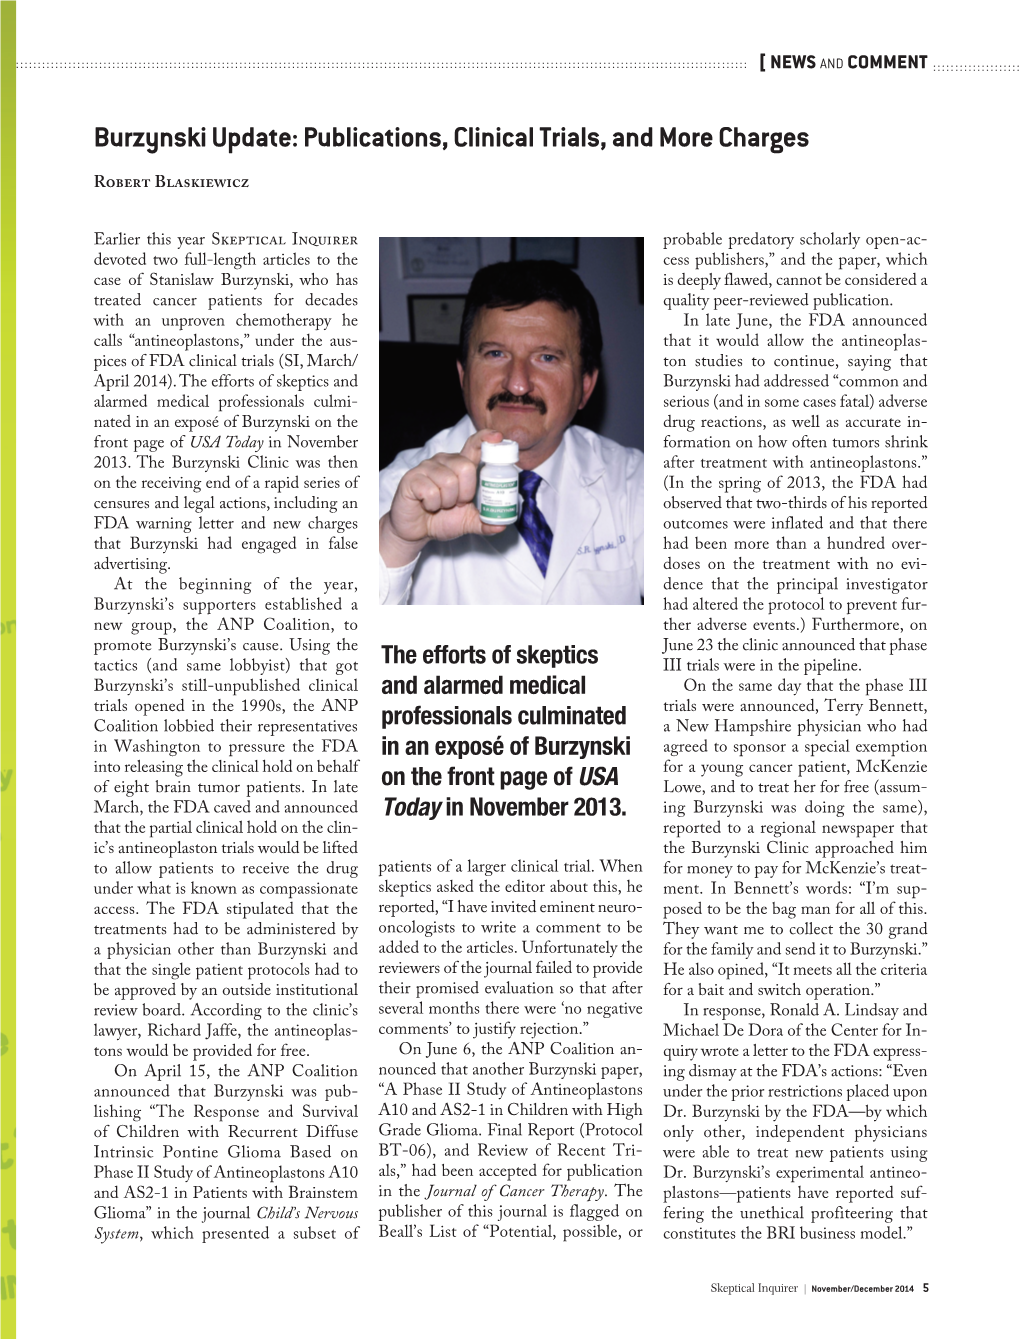 Burzynski Update: Publications, Clinical Trials, and More Charges